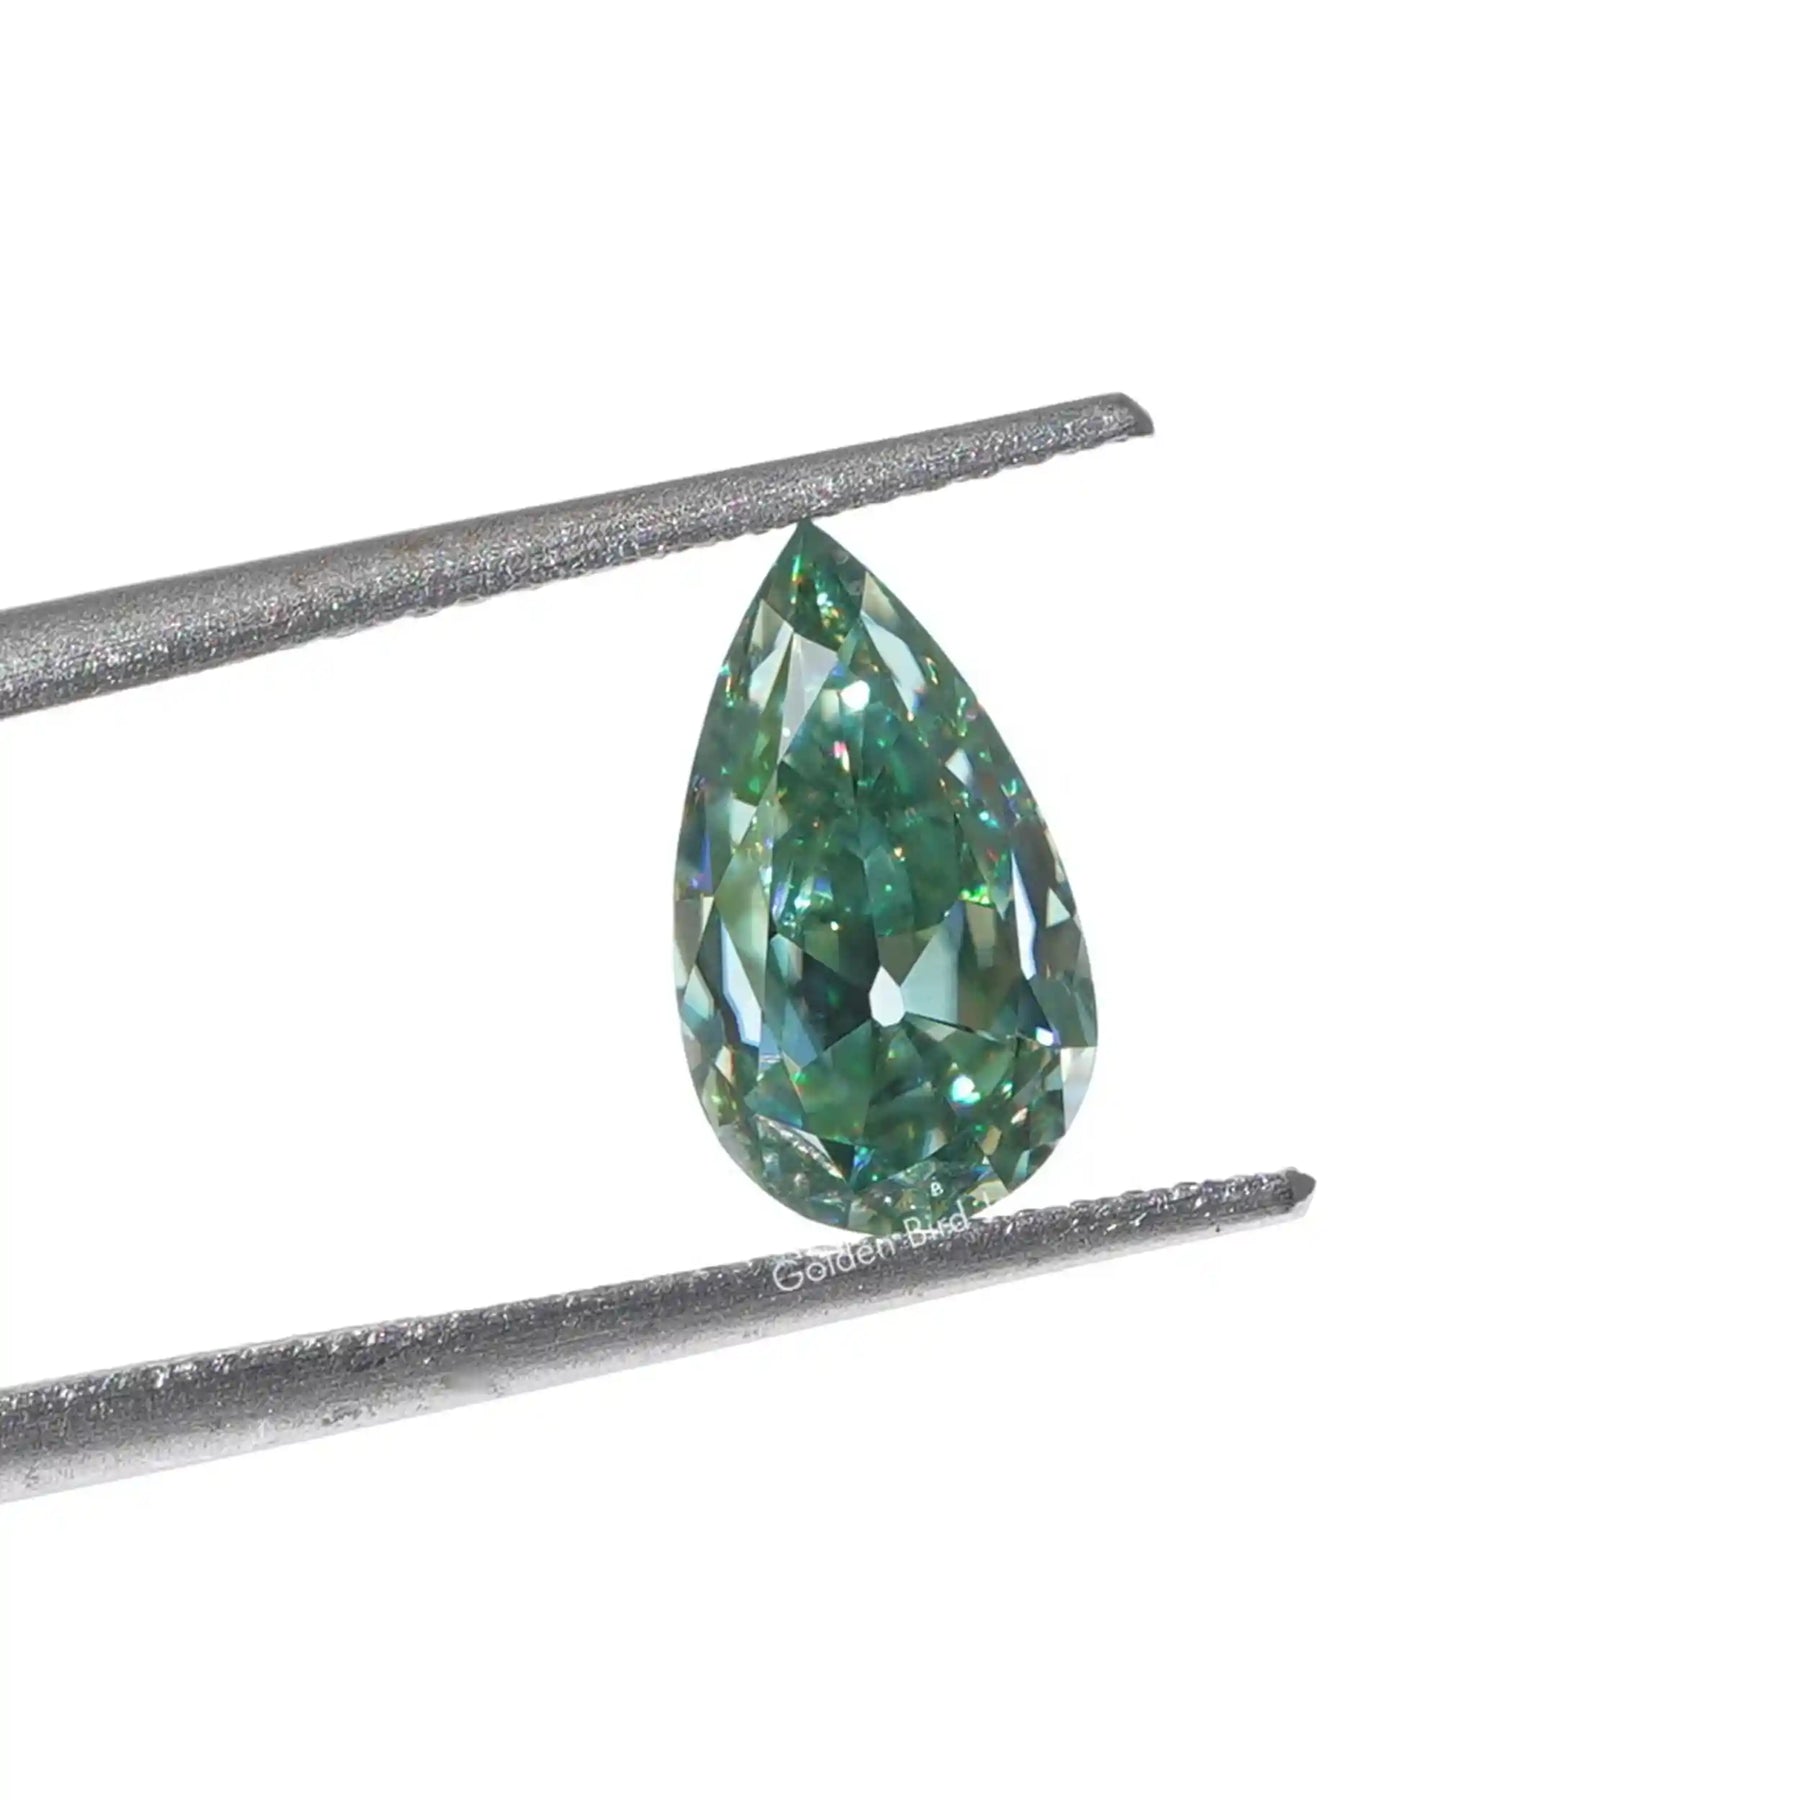 [Front view of blue green pear cut loose moissanite stone made of vs clarity]-[Golden Bird Jewels]